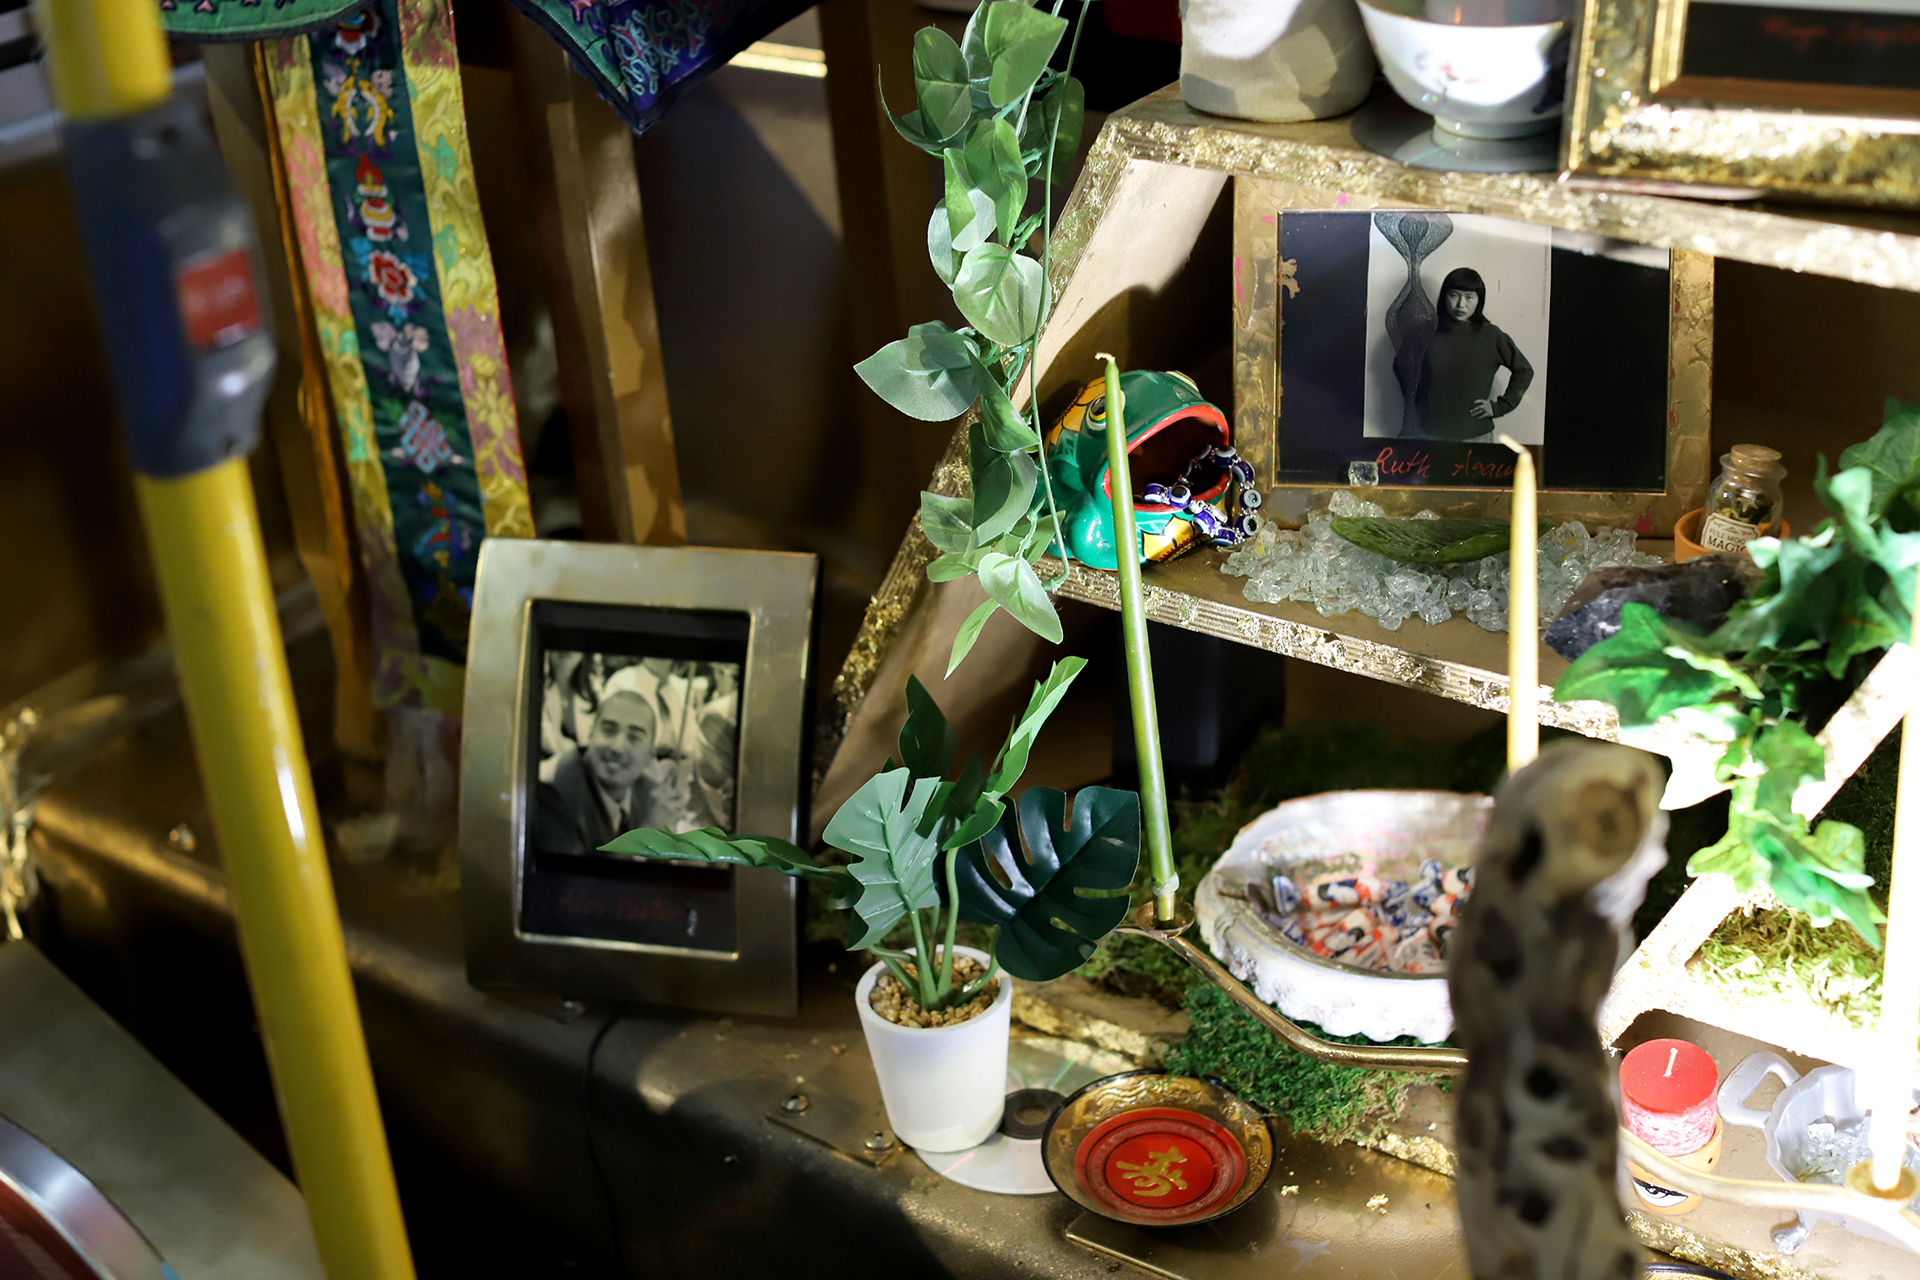 Close-up view of plants and photographs in altar arrangement